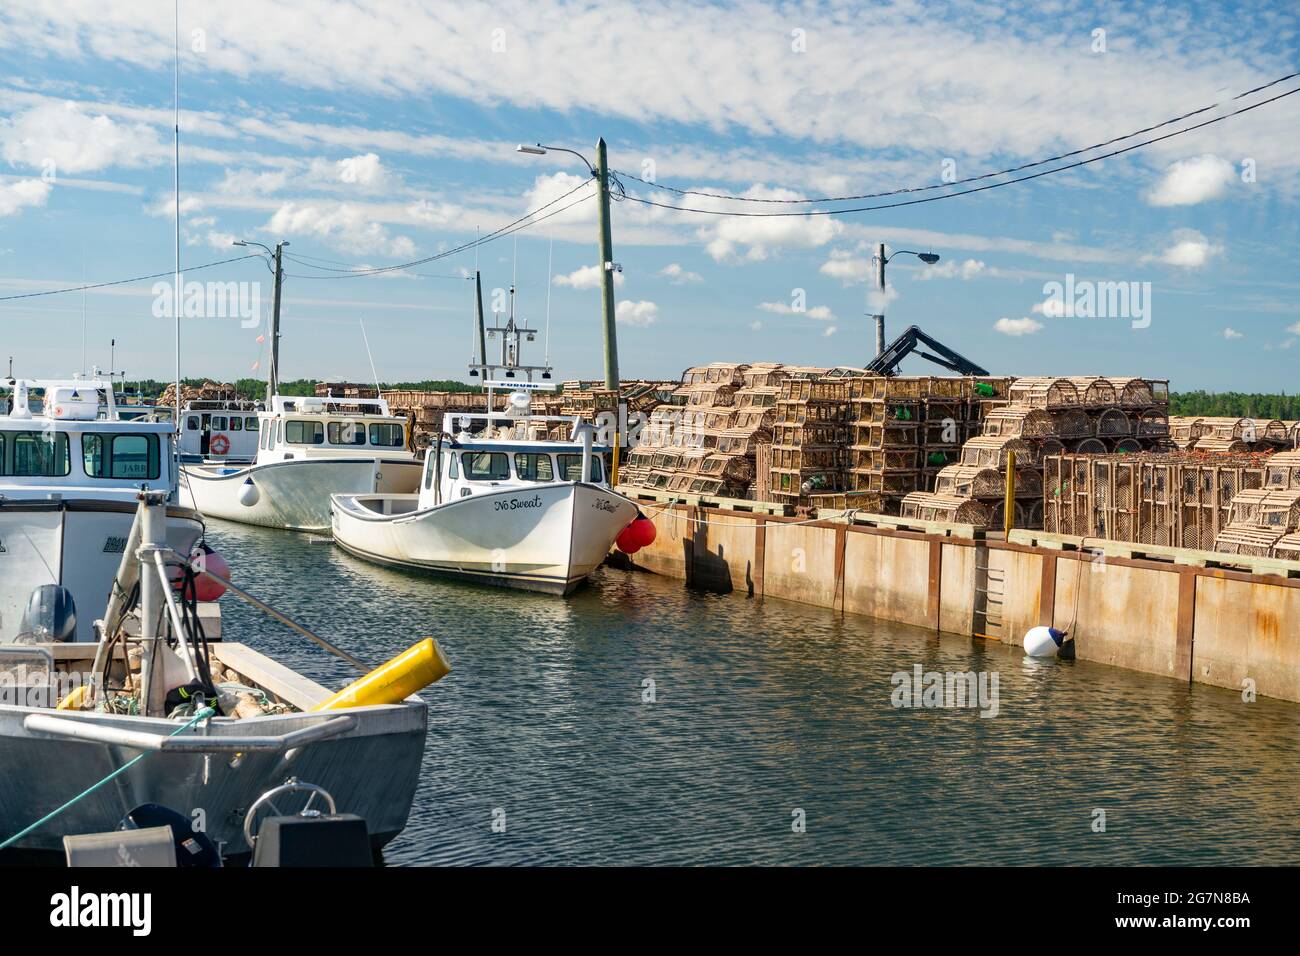 Lobster fishing boats tied up at the wharf in rural Prince Edward Island, Canada. Stock Photo